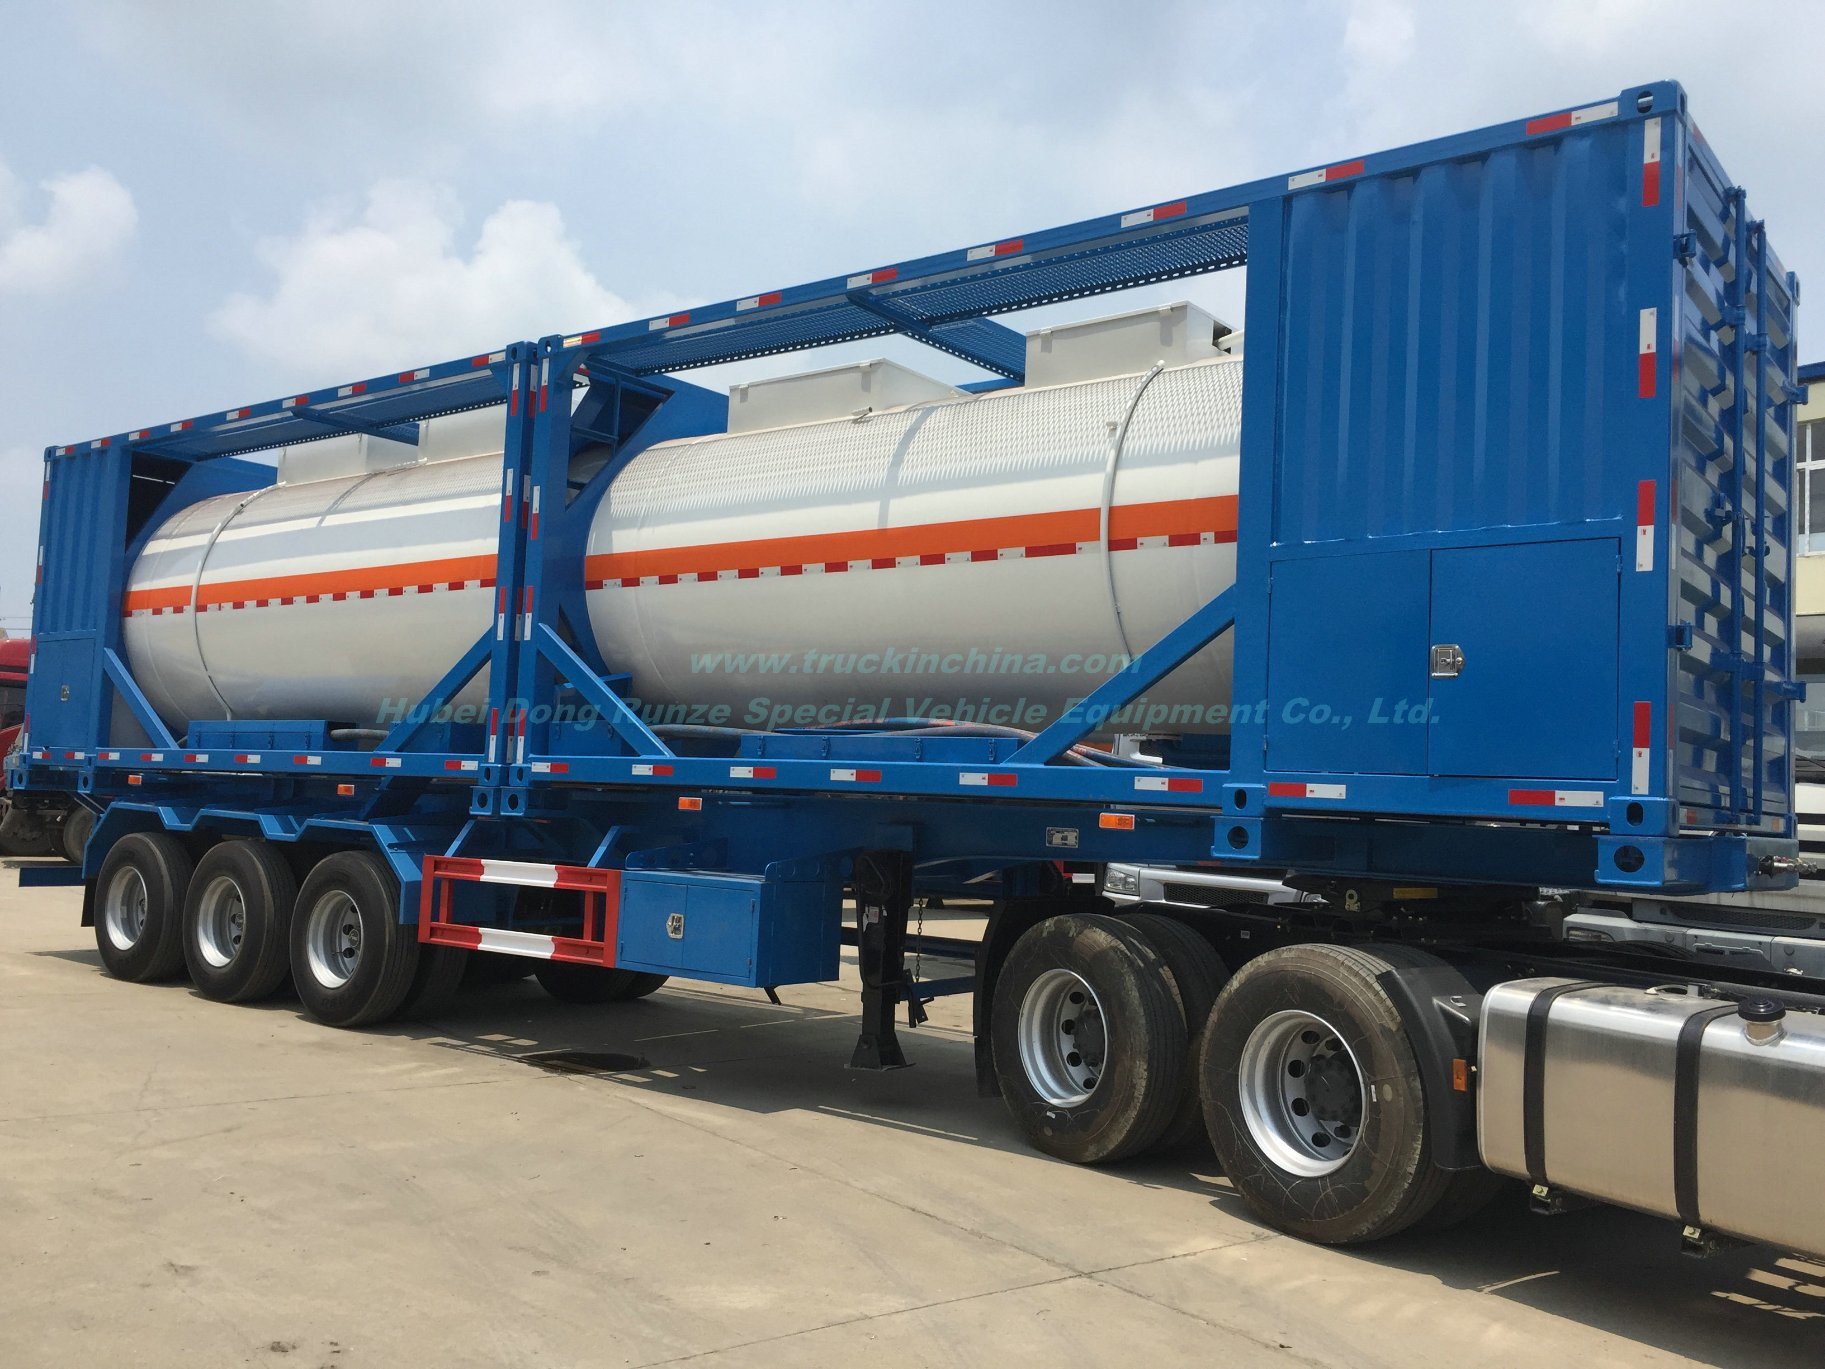 20FT Tank Container for Fuel, Crude Oil, Diesel 20, 000 Liters Mounted with Pump Skid Portable Gas Gasoline, Kerosene, Jet Oil Filling Staion